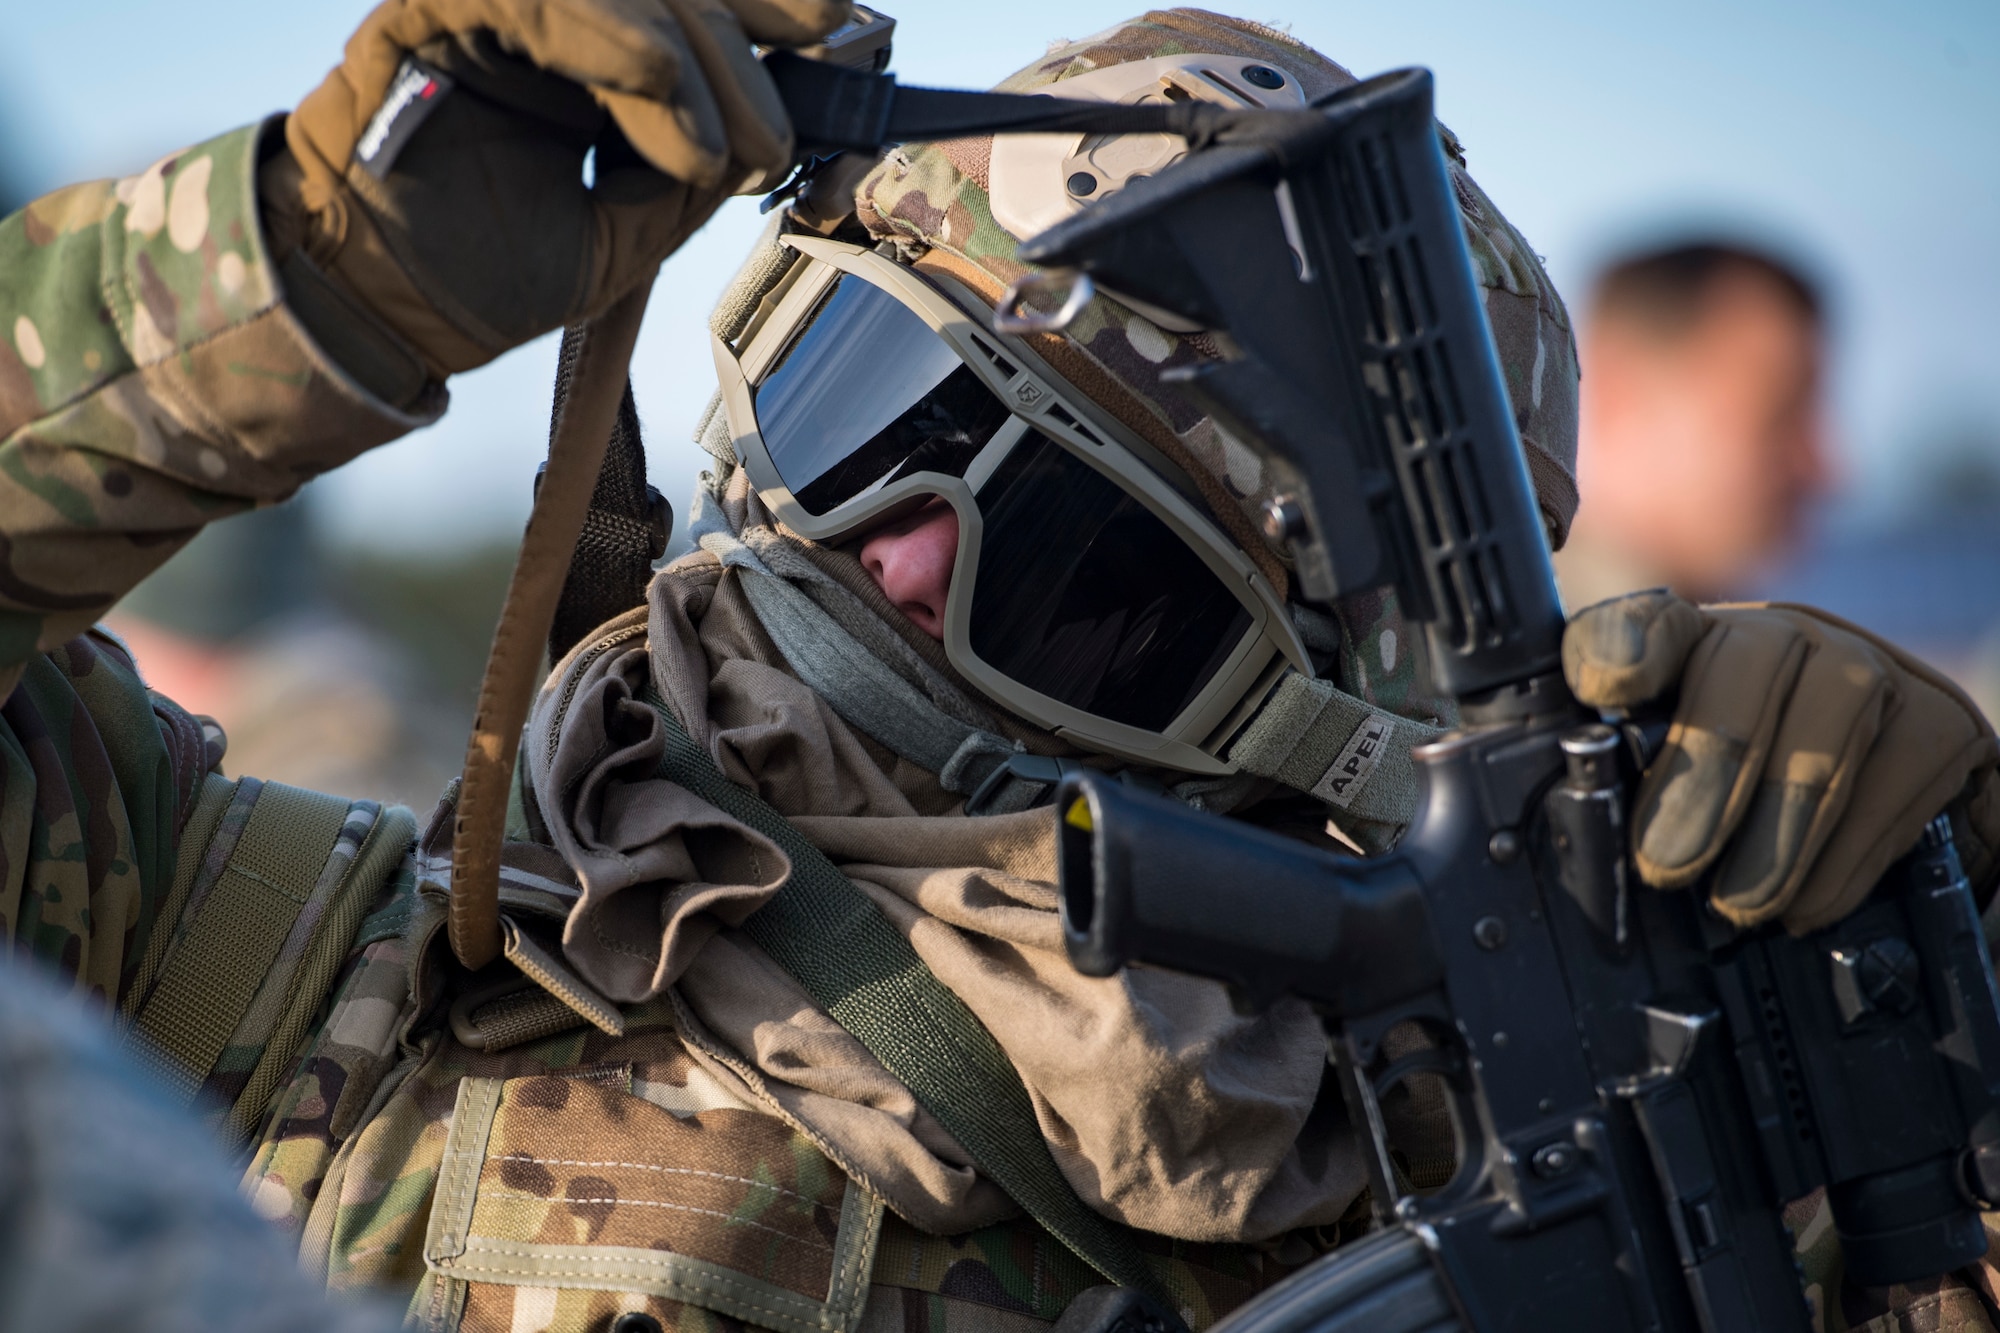 An Airman from the 824th Base Defense Squadron, removes their weapon during a Mission Readiness Exercise, March 16, 2018, at Joint Base McGuire-Dix Lakehurst, N.J. Evaluators tested the 824th BDS from Moody Air Force Base, Ga., and the 105th Security Forces Squadron from Stewart Air National Guard Base, N.Y., to ensure their combat readiness. (U.S. Air Force photo by Senior Airman Janiqua P. Robinson)